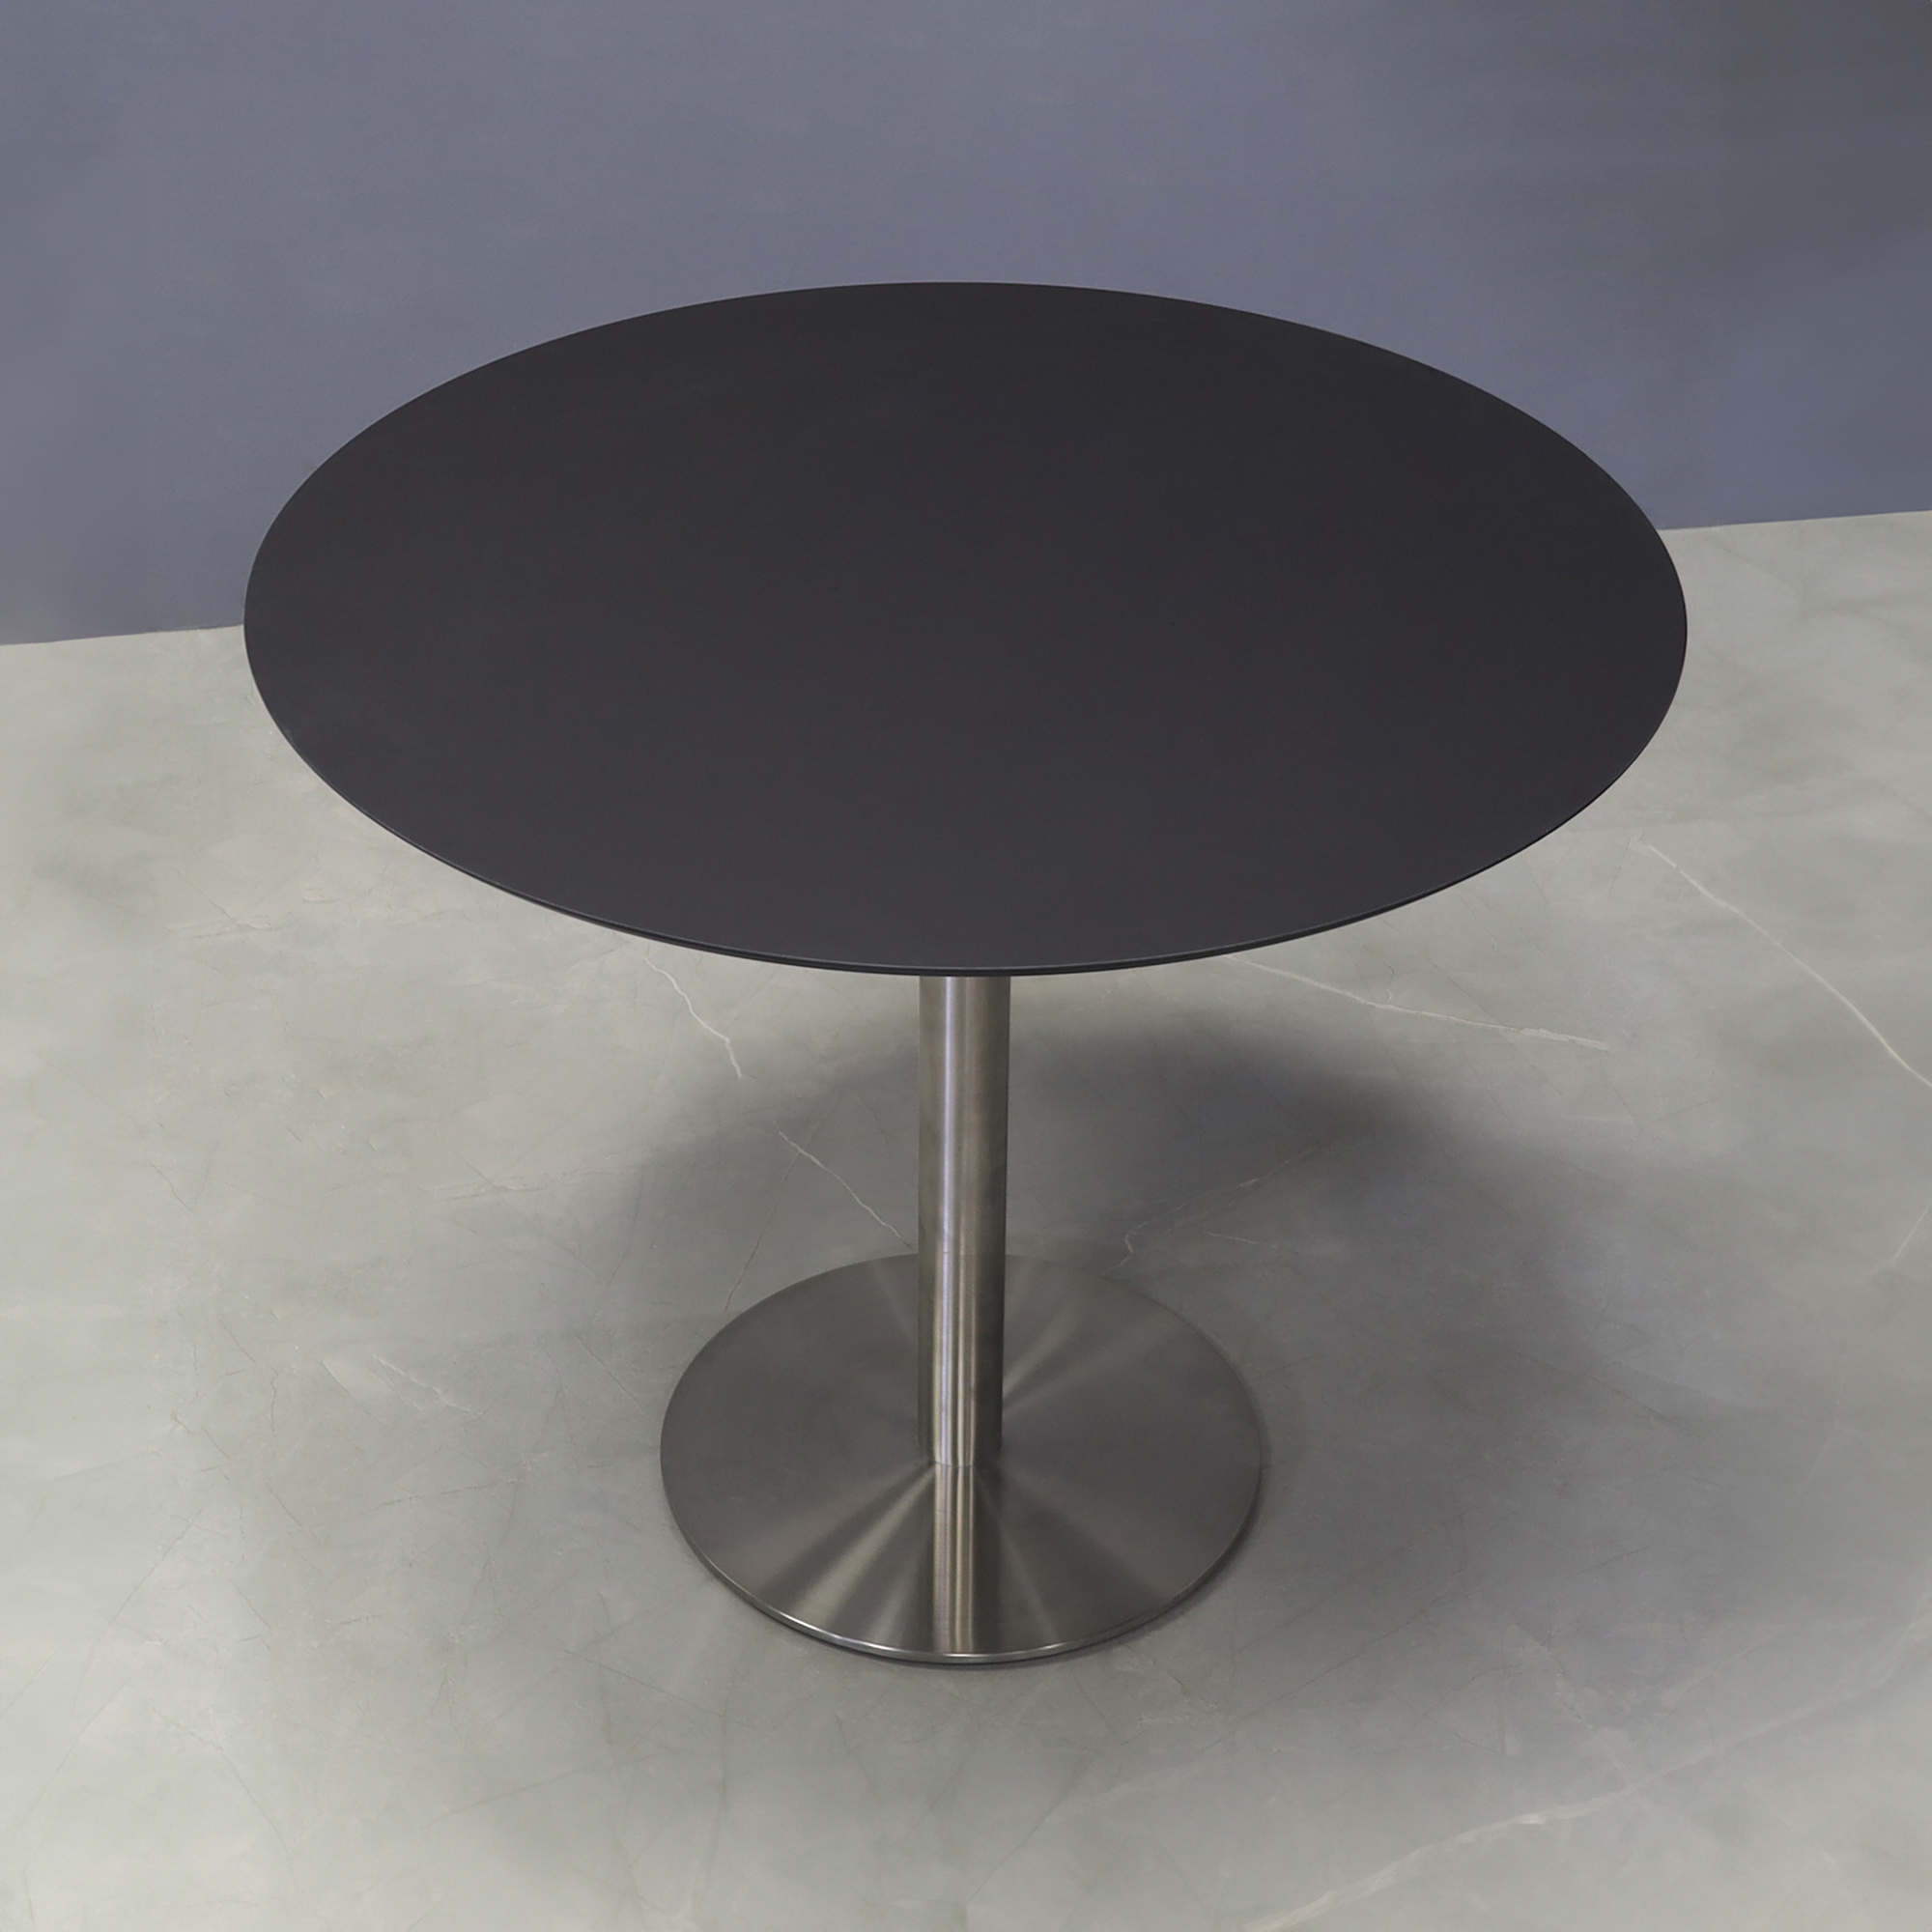 36-inch California Round Conference/Cafeteria Table in 1/2